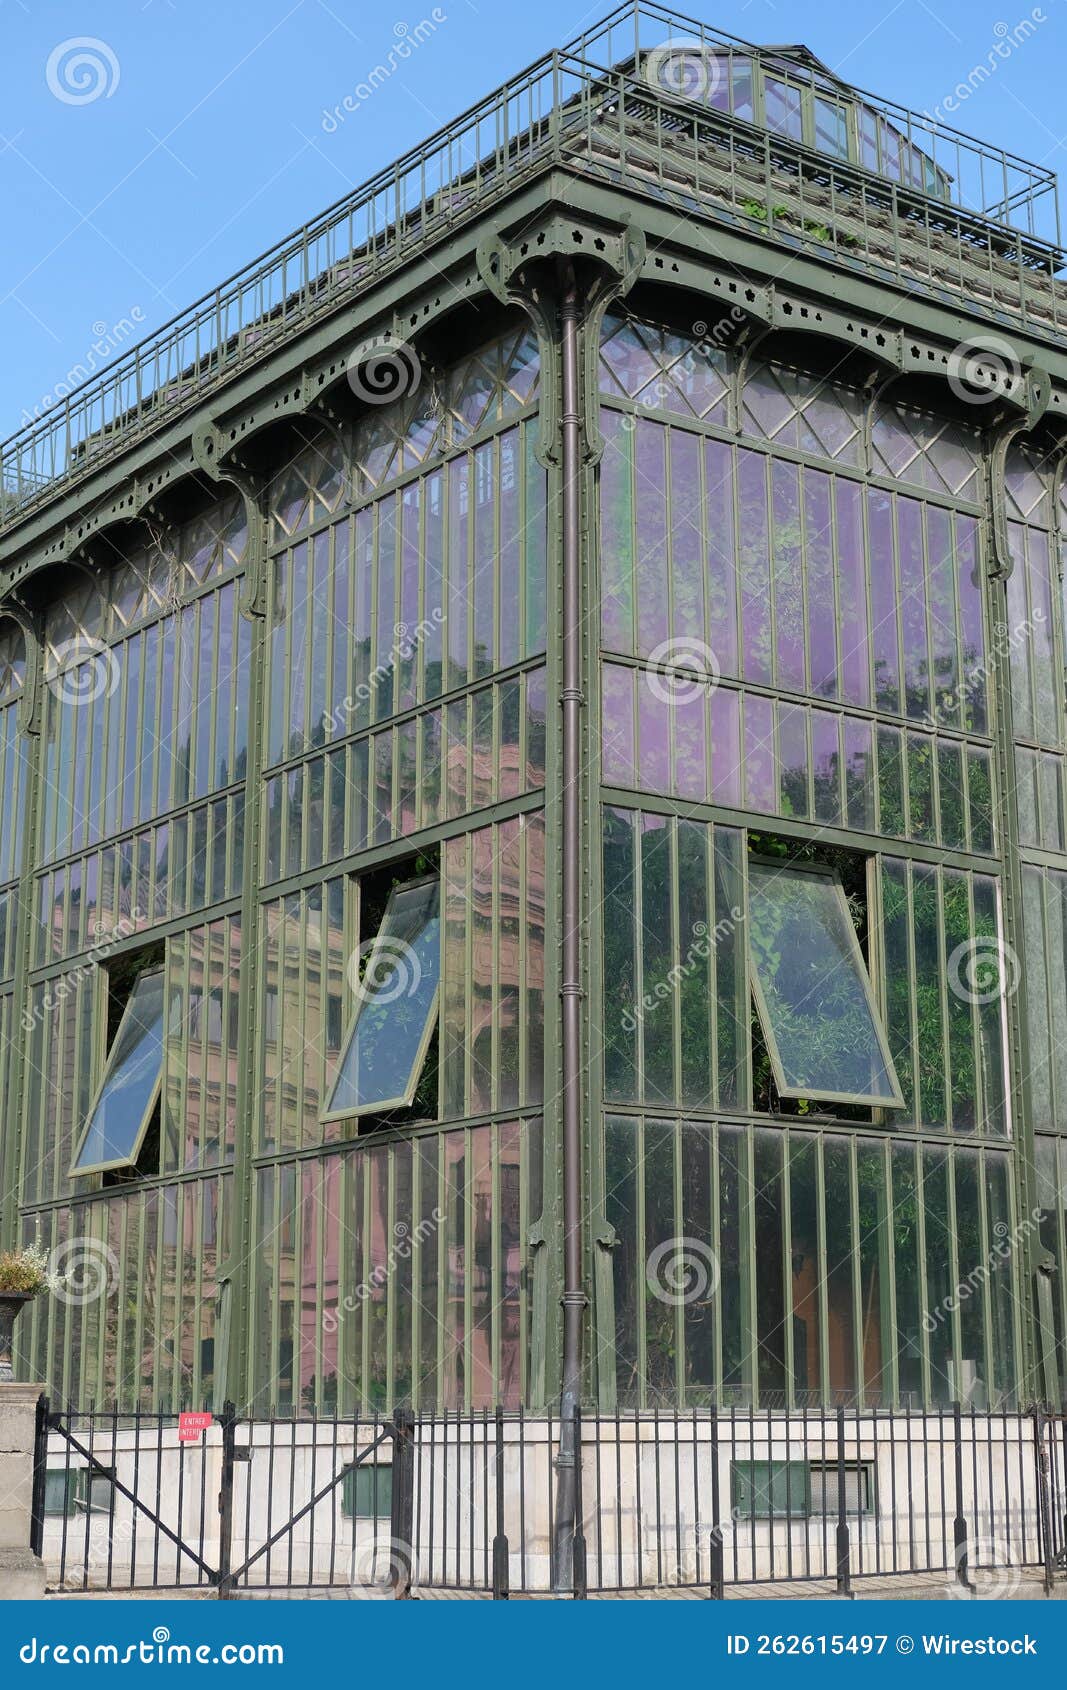 vertical shot of a greenhouse in the garden of plants in paris, france